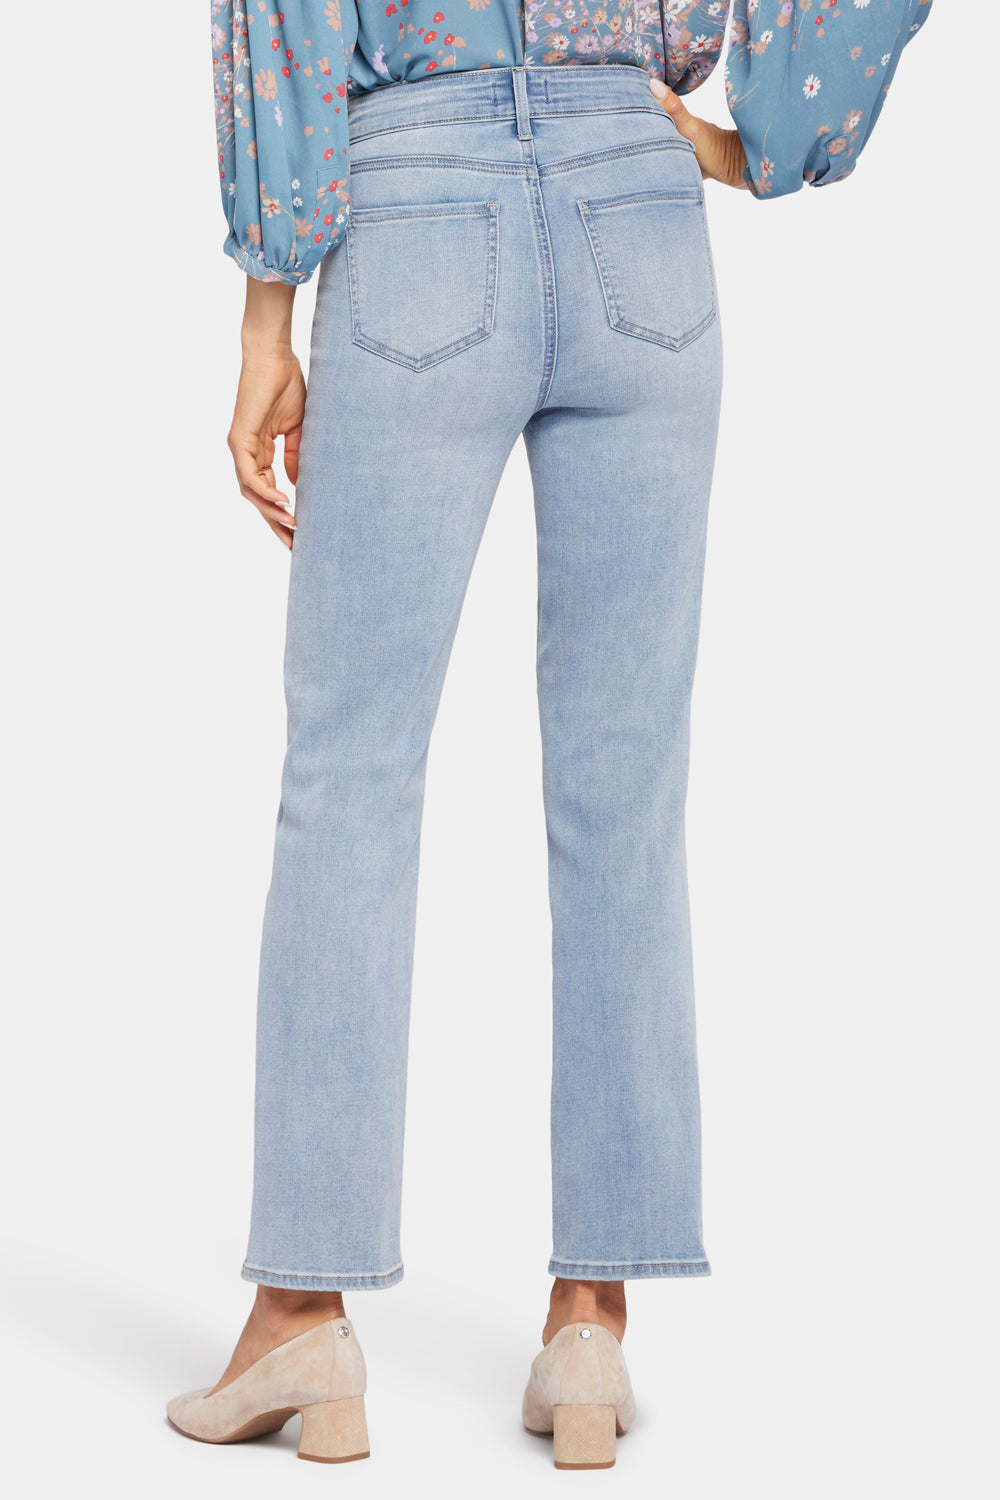 NYDJ High Straight Jeans  - Afterglow